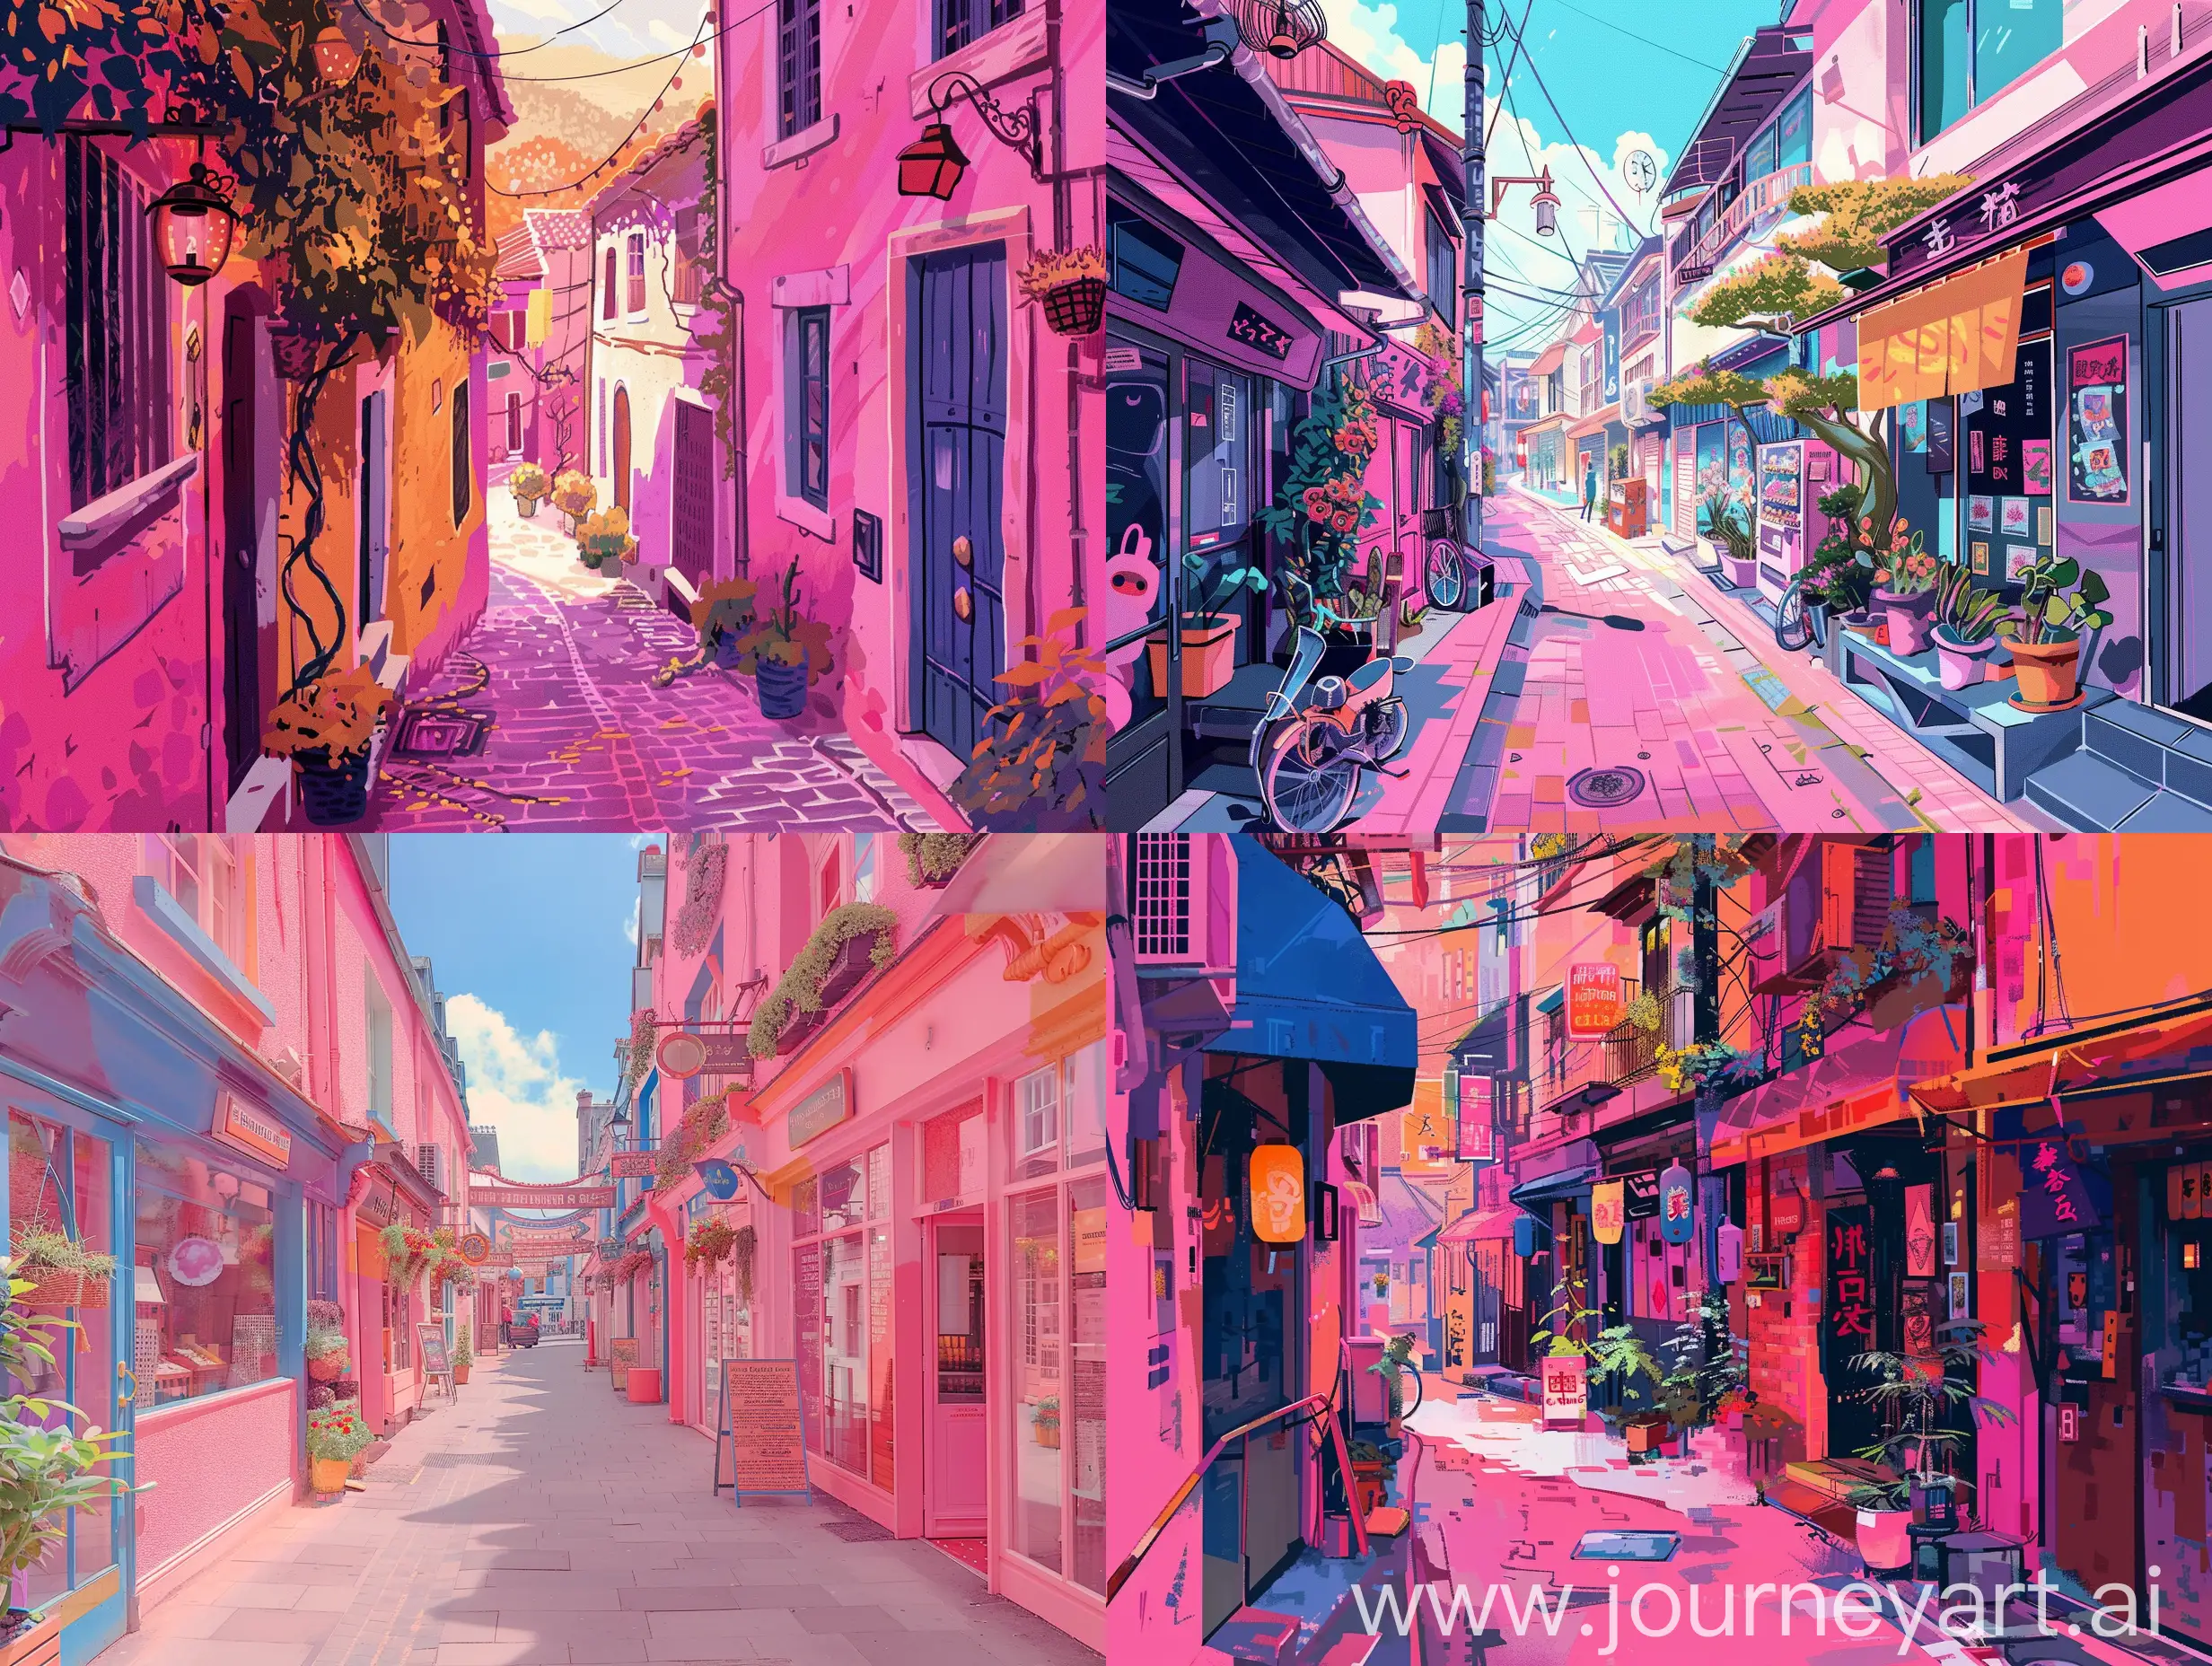 Vibrant-Pink-Street-Scene-with-Warm-Elements